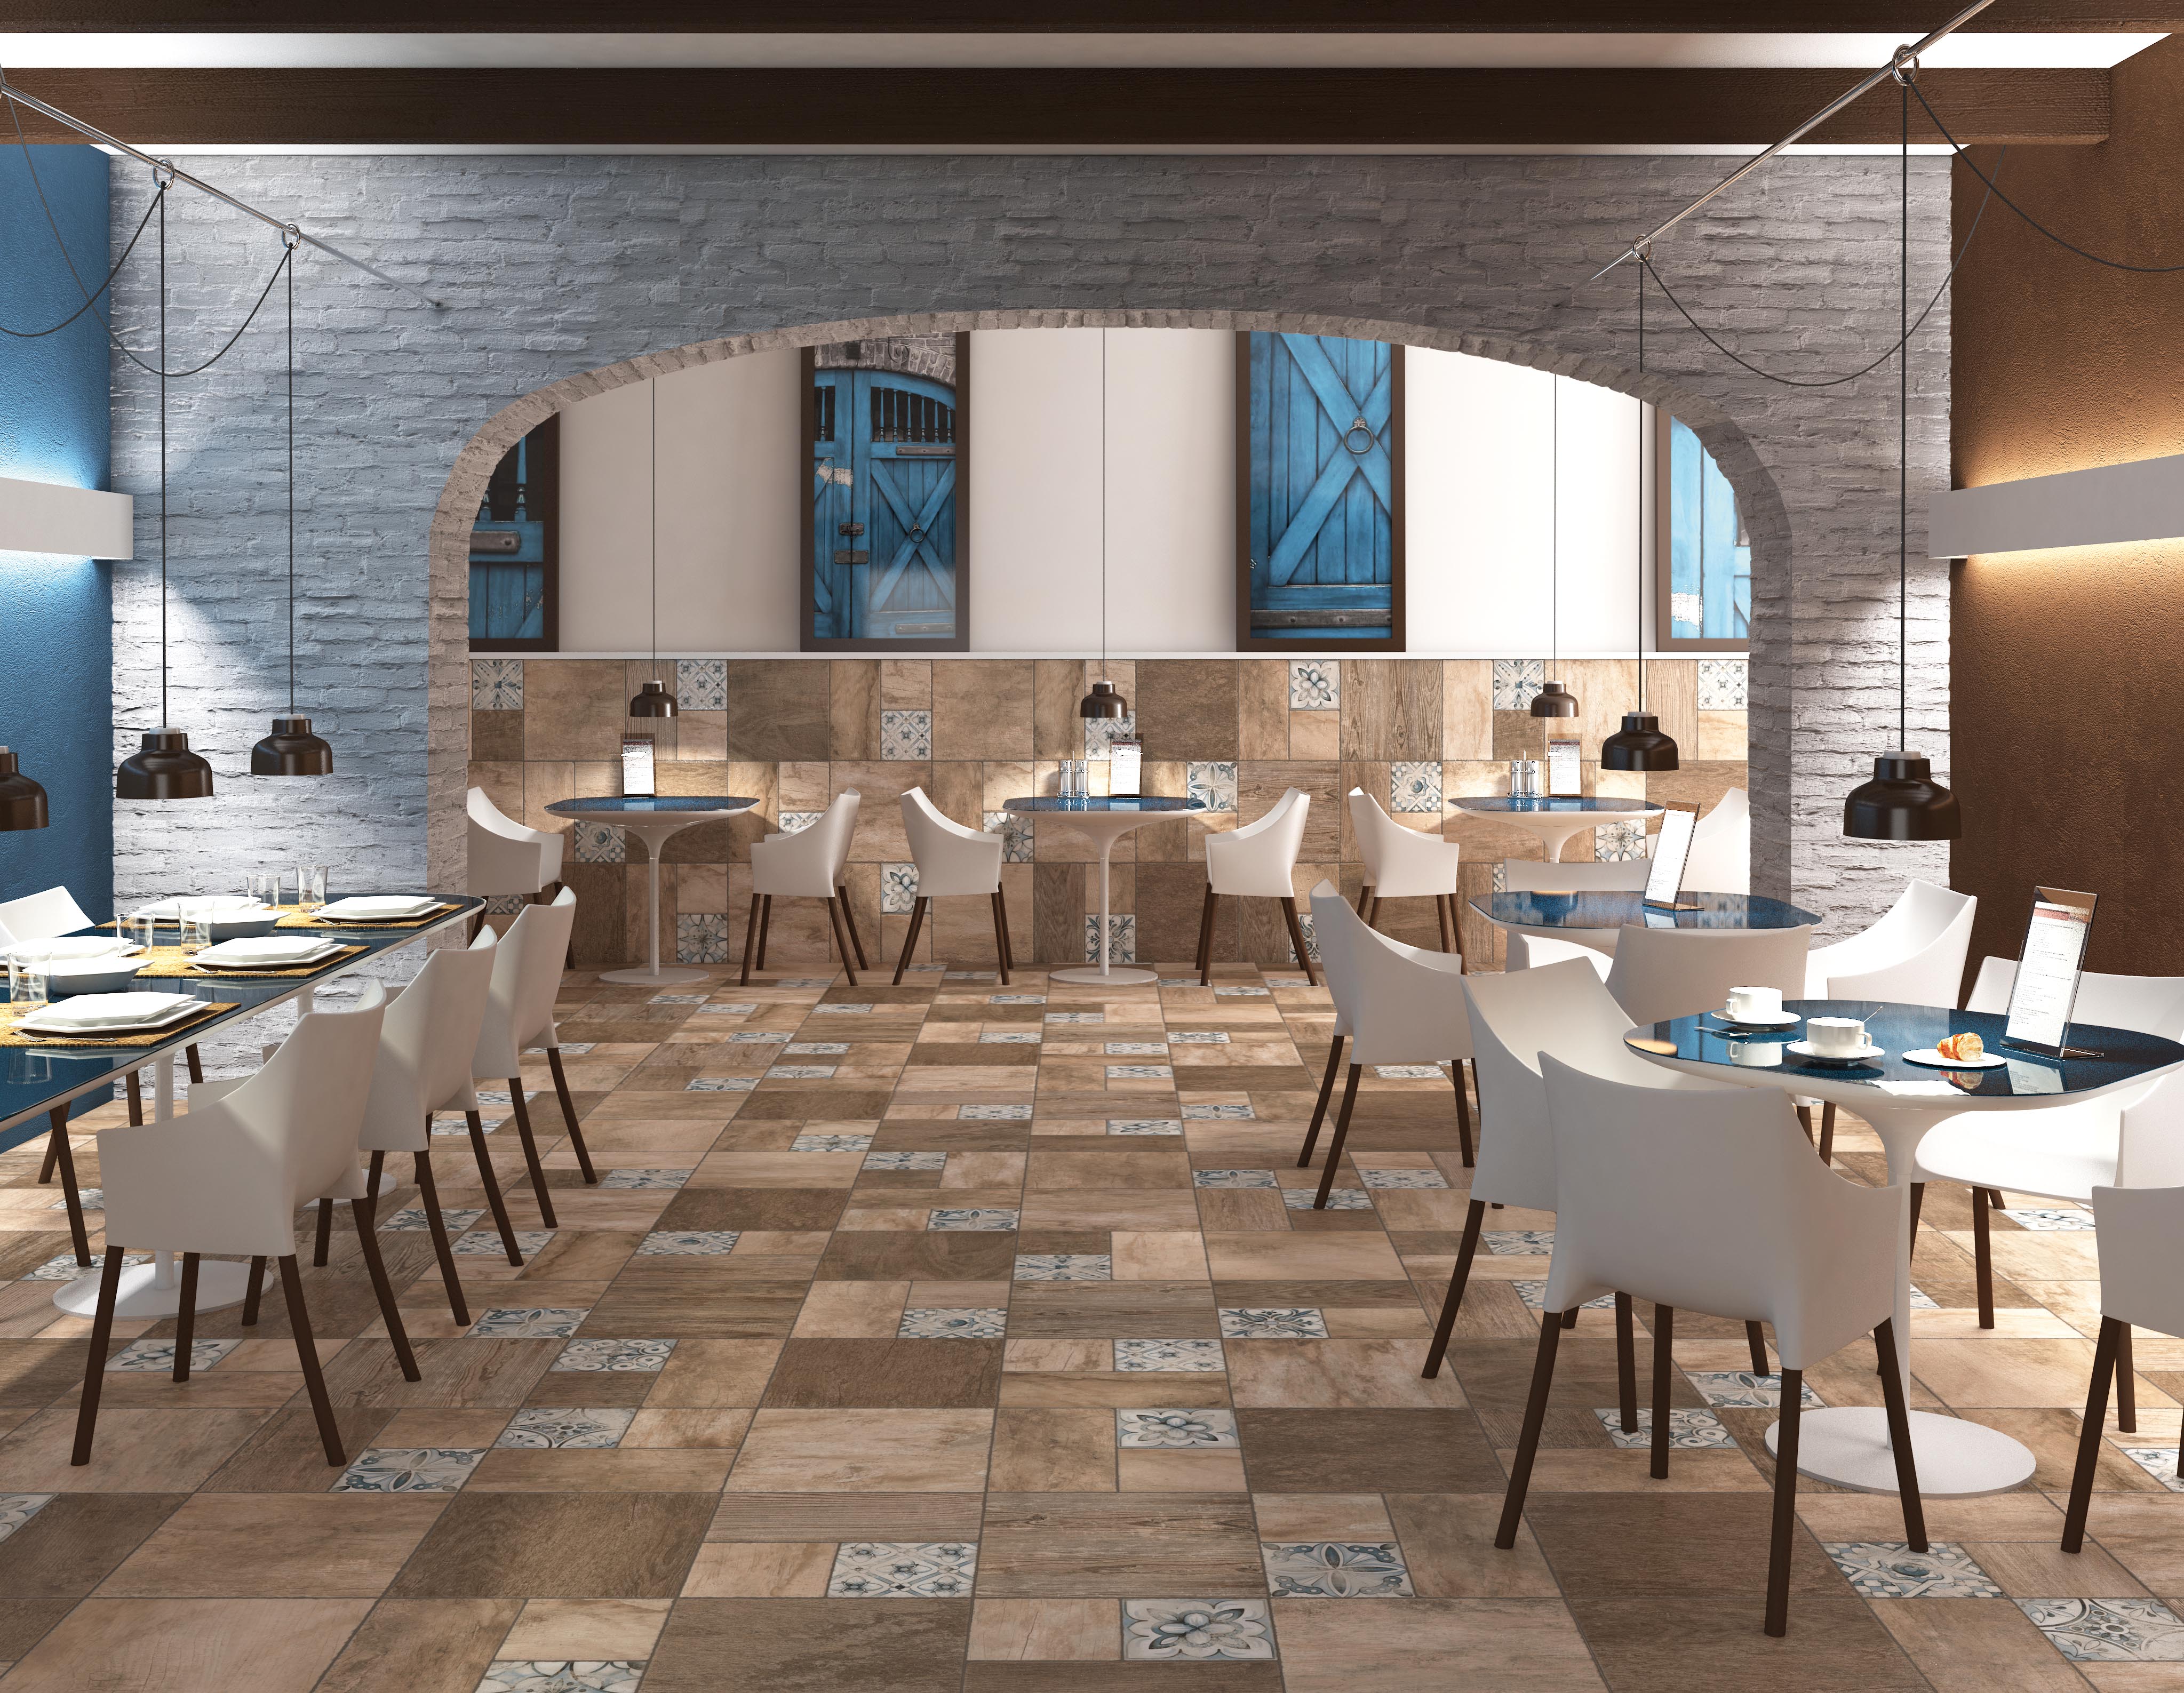 PATCHWOOD Ceramic and Porcelain Tiles by Arcana Ceramica